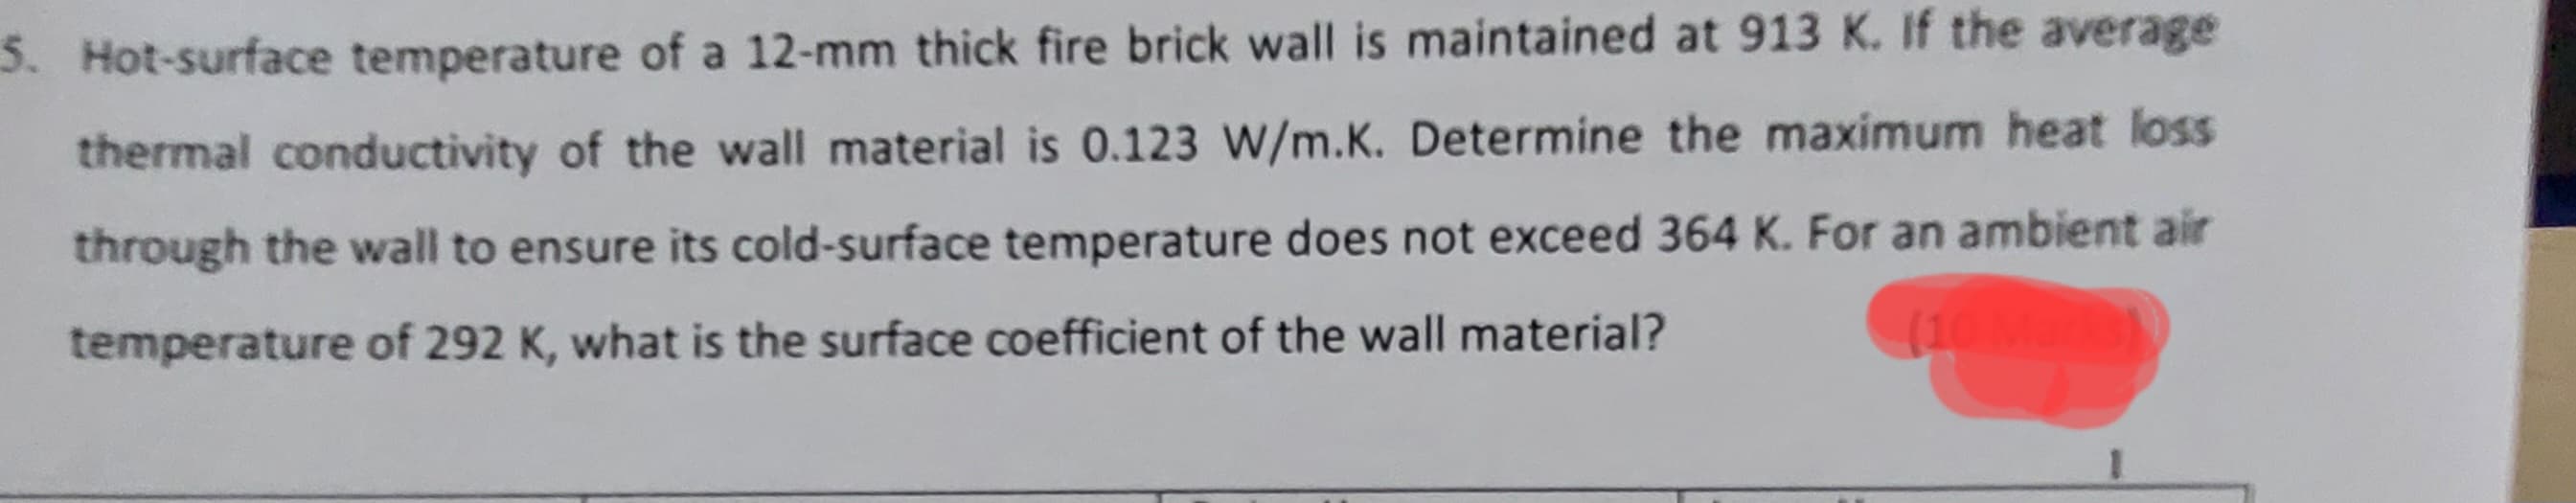 5. Hot-surface temperature of a 12-mm thick fire brick wall is maintained at 913 K. If the average
thermal conductivity of the wall material is 0.123 W/m.K. Determine the maximum heat loss
through the wall to ensure its cold-surface temperature does not exceed 364 K. For an ambient air
temperature of 292 K, what is the surface coefficient of the wall material?
(10 M